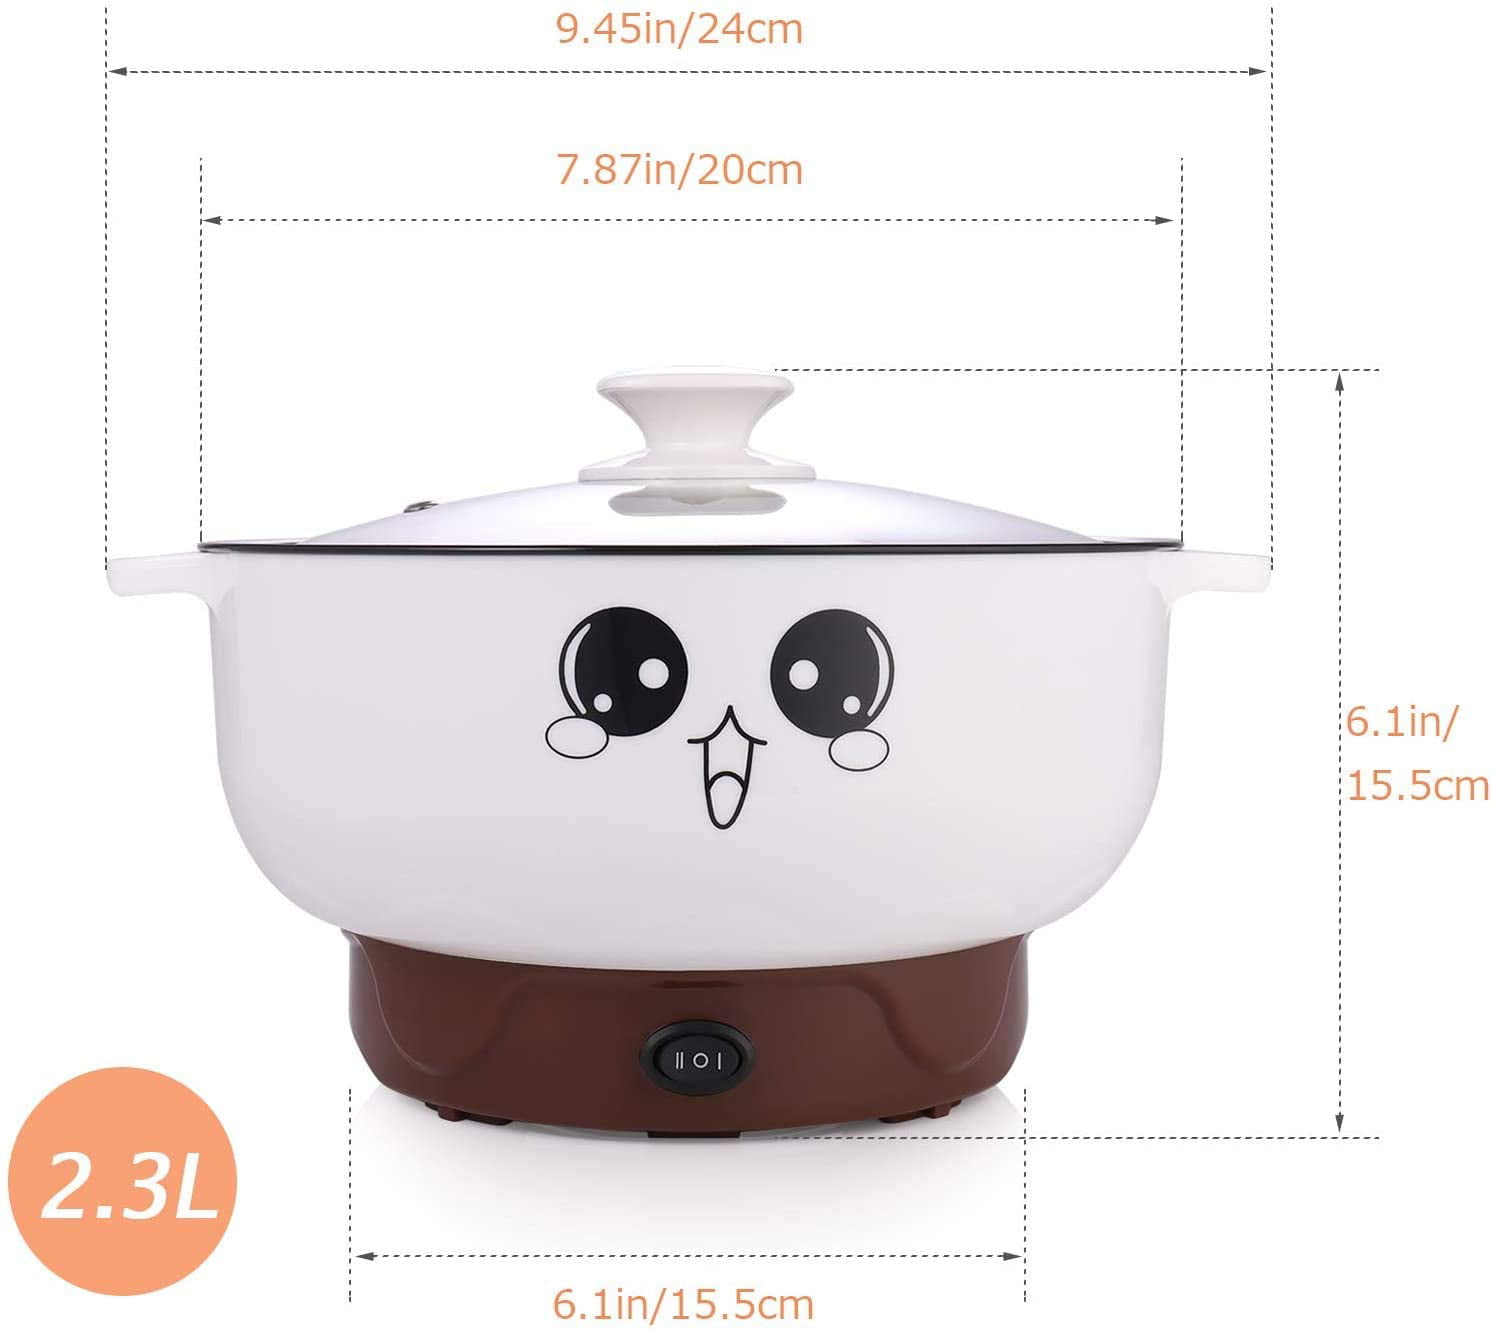 JIAN YA NA 110V Electric Skillet with Lid 4-in-1 Multifunction Non-Stick  Stainless Steel Electric Hot Pot Noodles Rice Cooker Steamed Egg Soup Pot